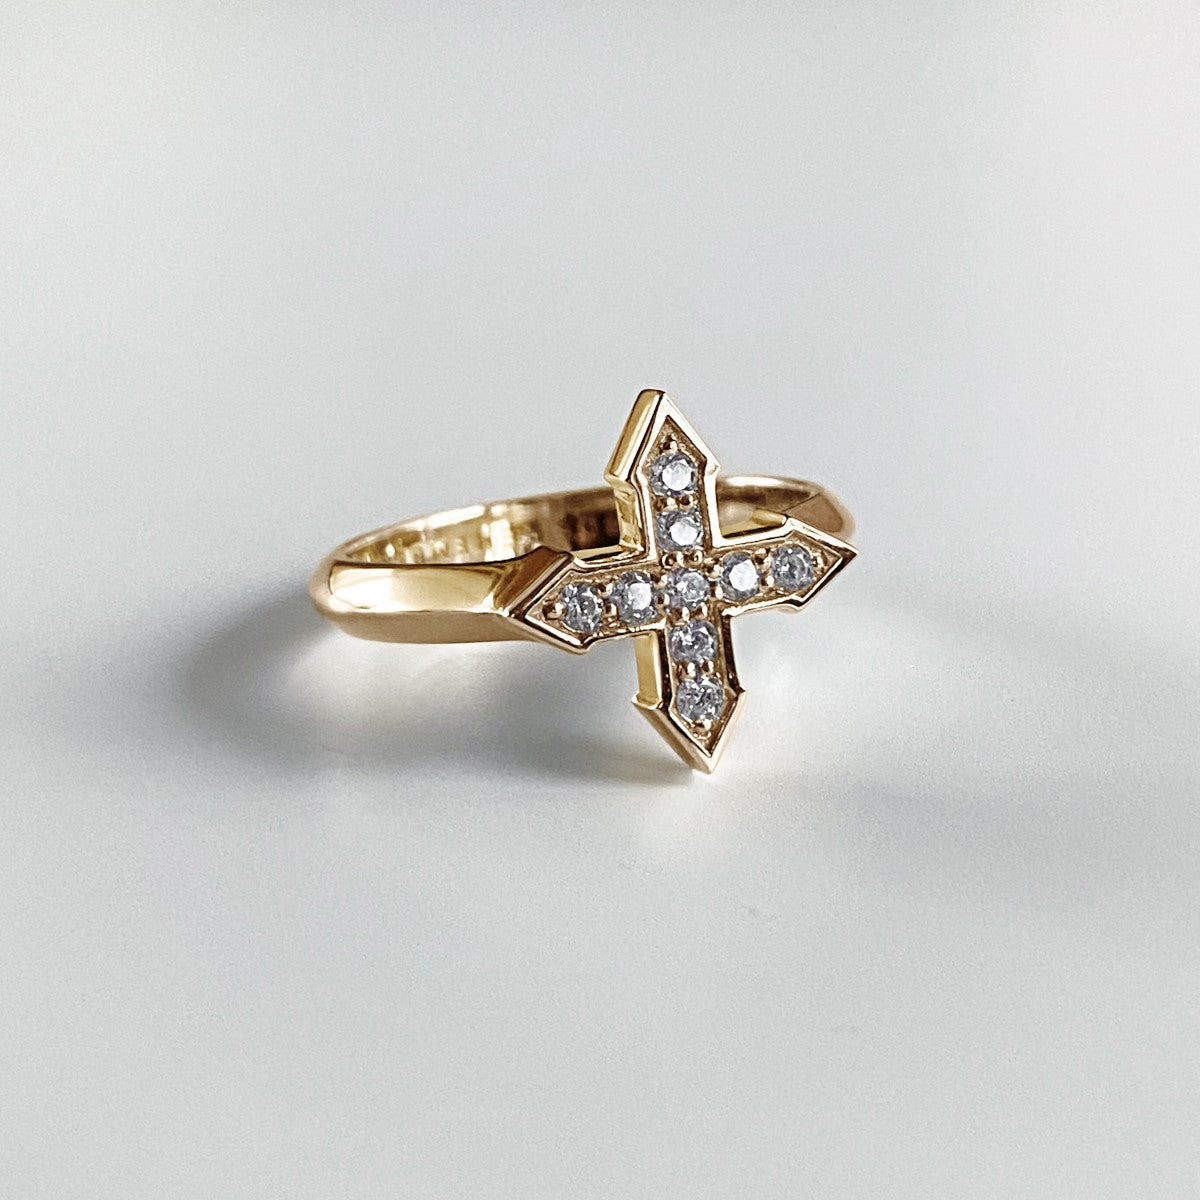 RING "STAR GLOW" WITH WHITE DIAMONDS / SOLID GOLD